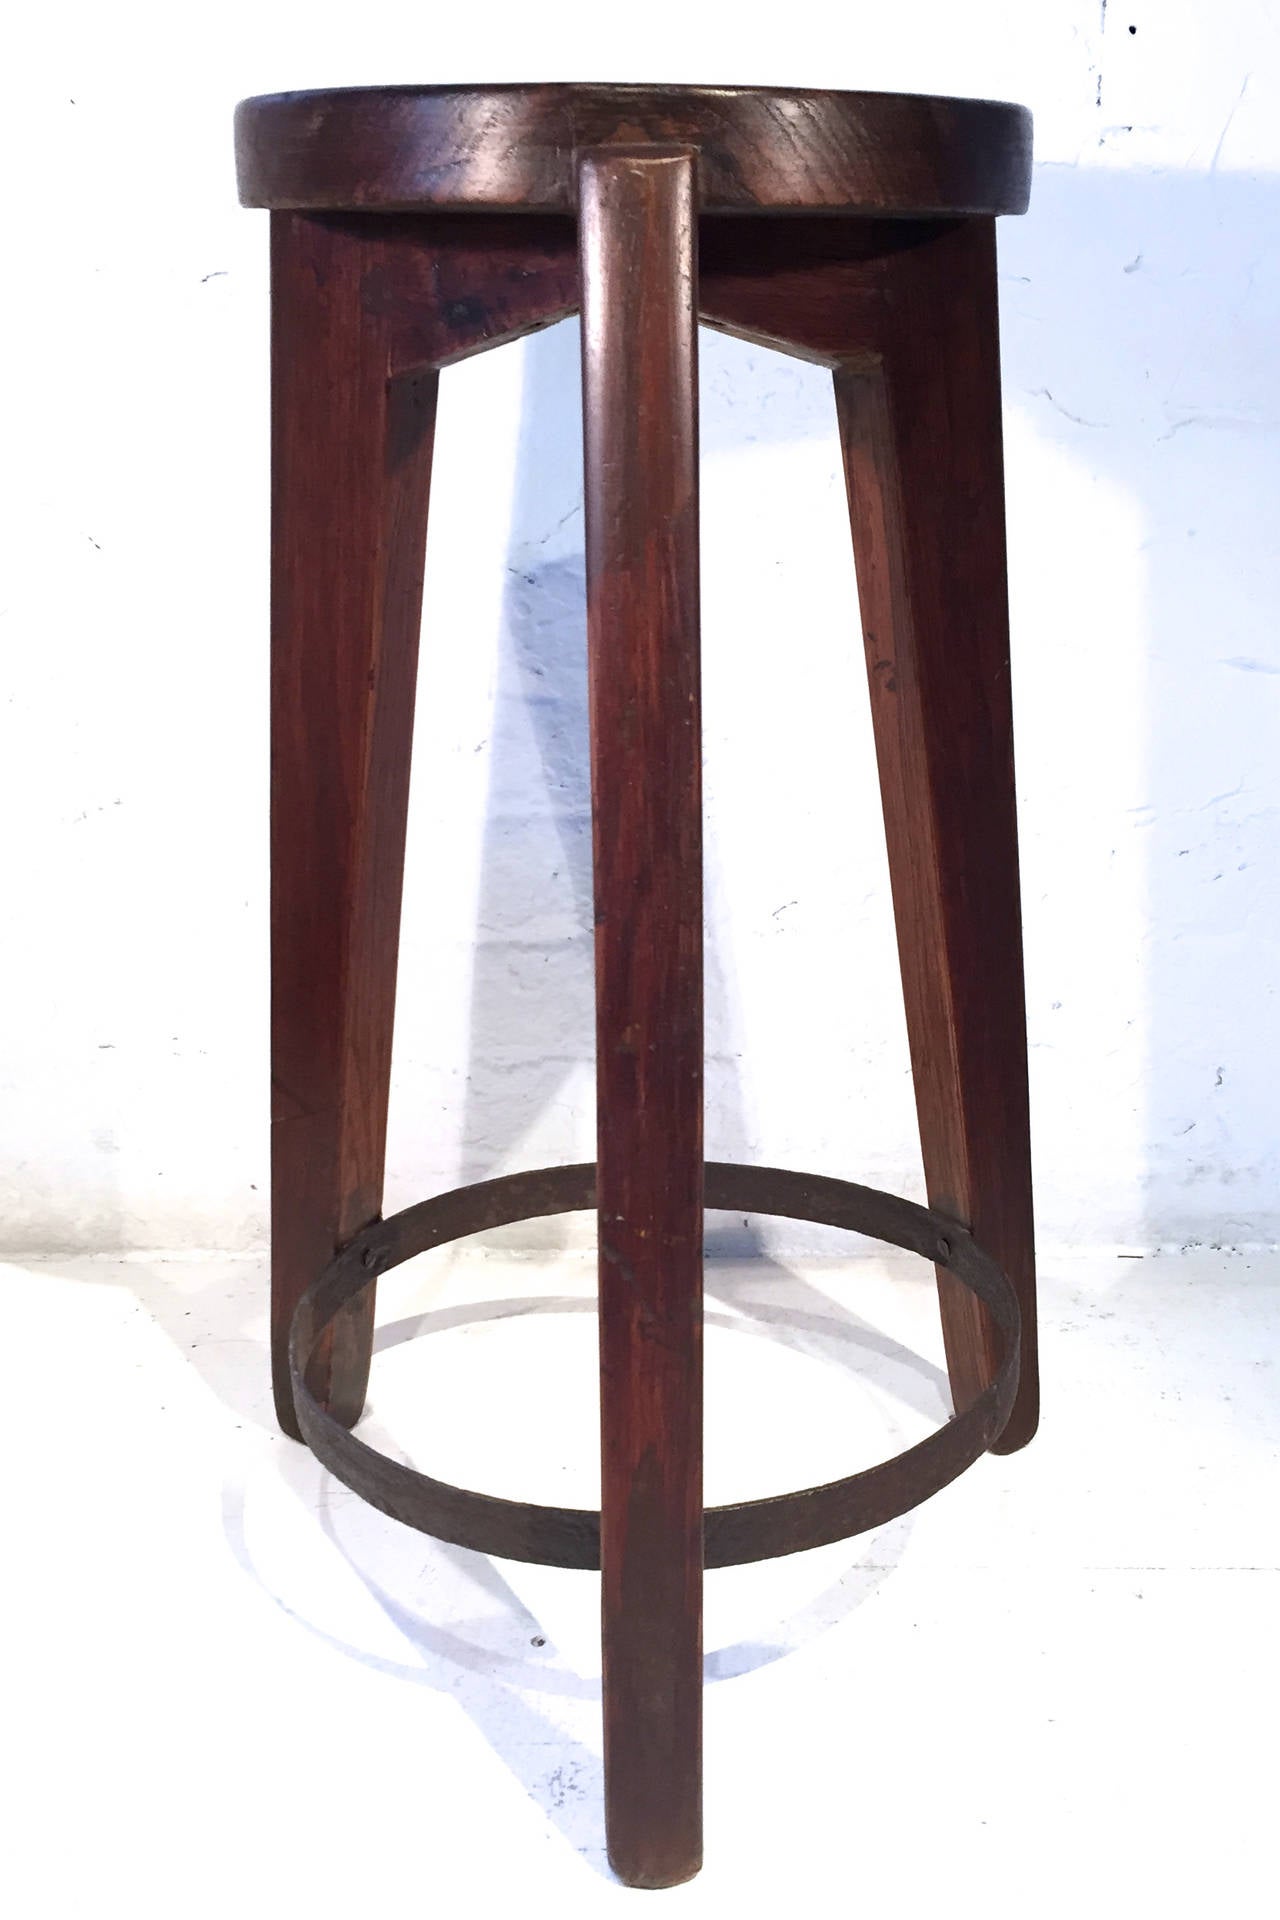 A stool by Pierre Jeanneret from Chandigrah's Punjab University science department. Very sturdy.